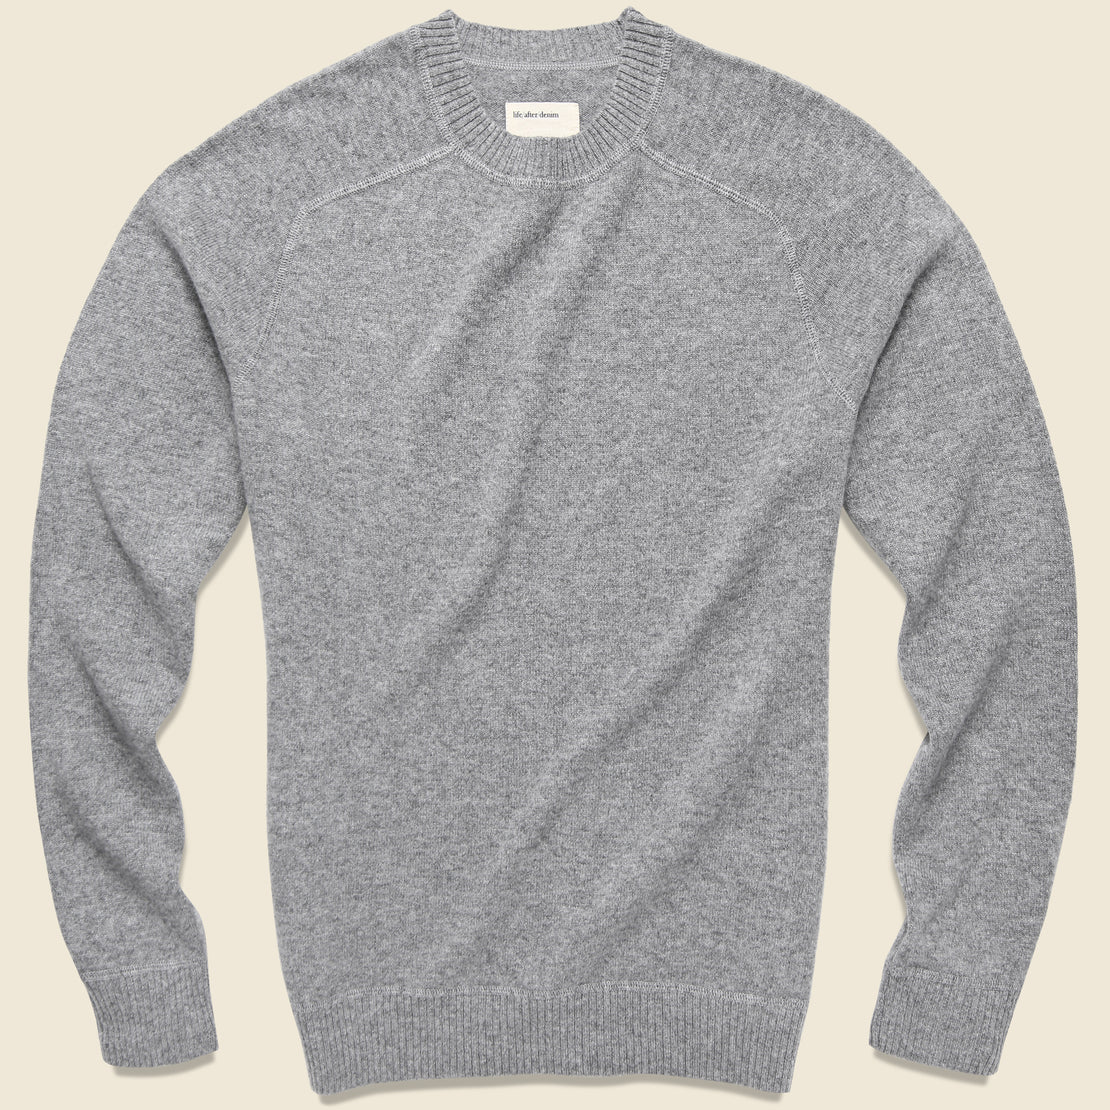 Life After Denim Columbia Cashmere Sweater - Heather Grey